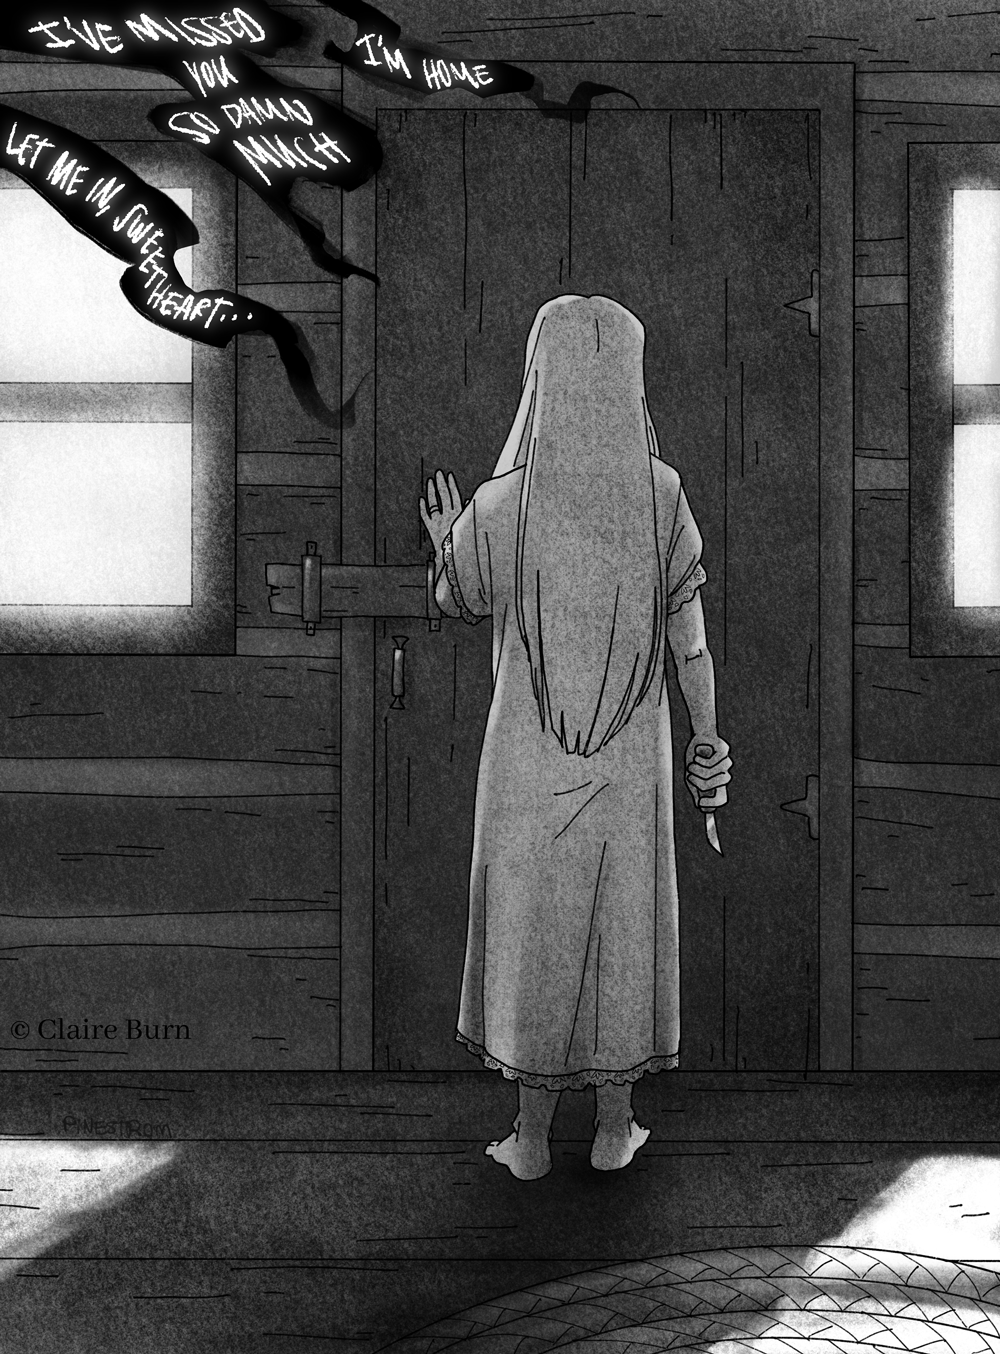 A woman stands facing a door, as an unseen sinister character whispers to her.